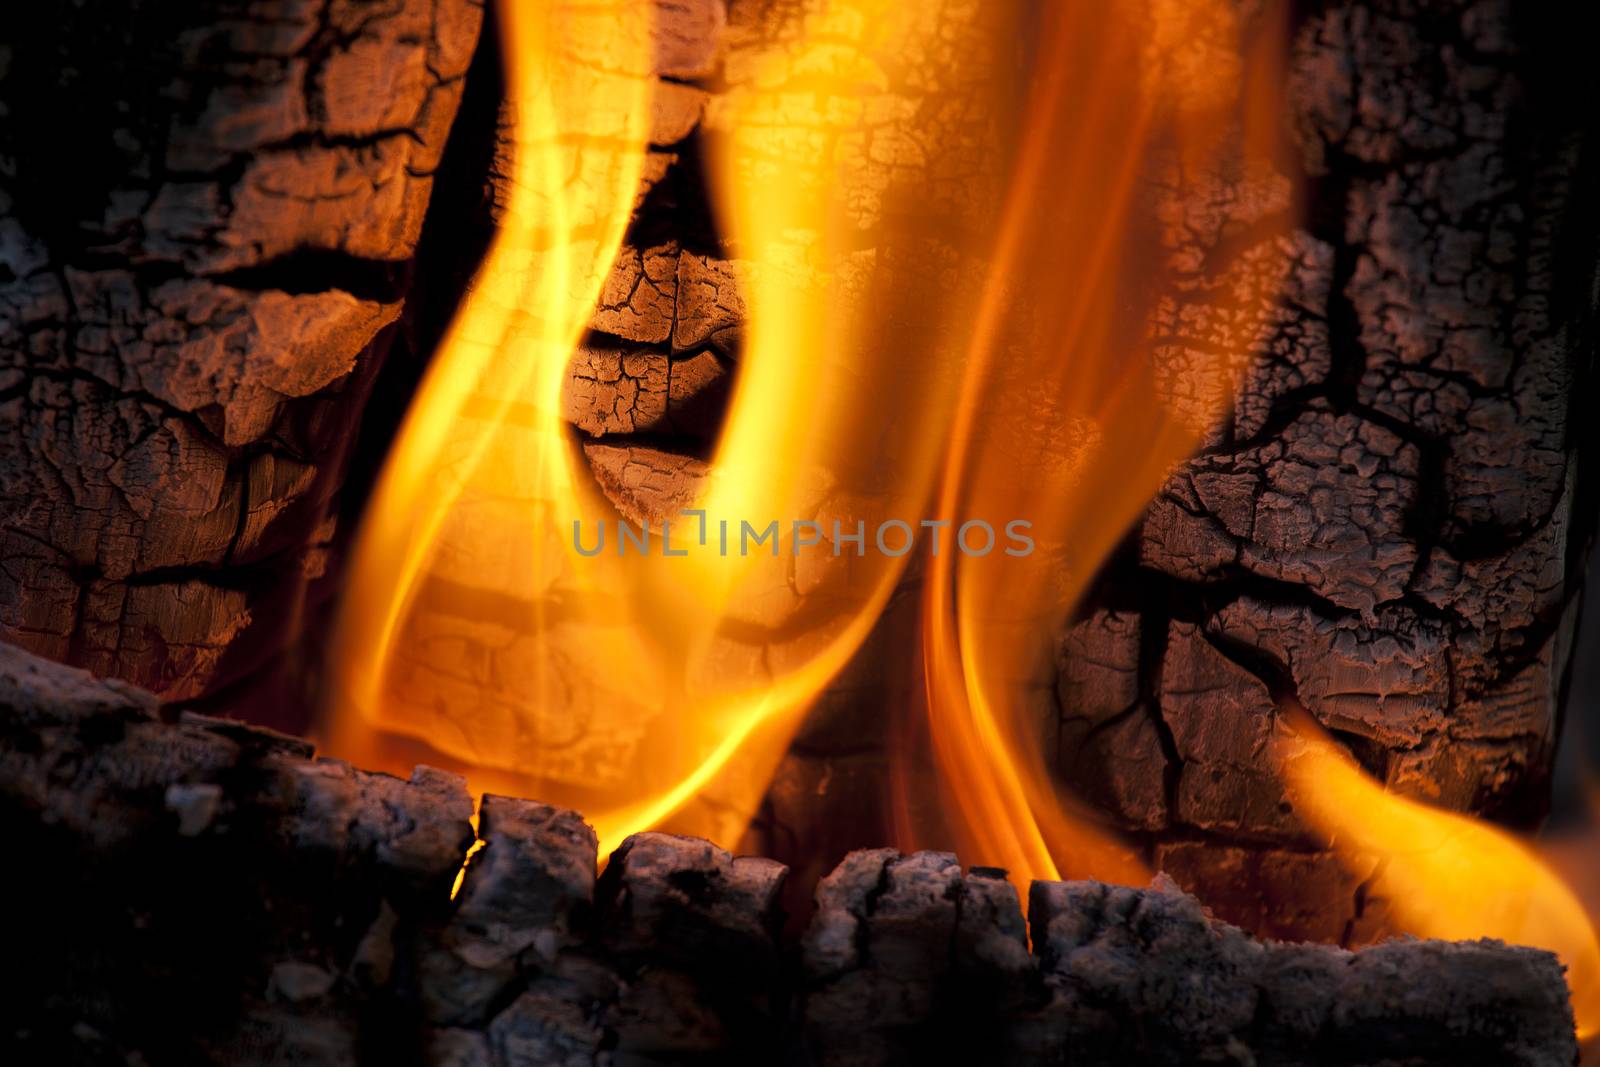 Bright flames of a fire in the wood burning coals and ashes.